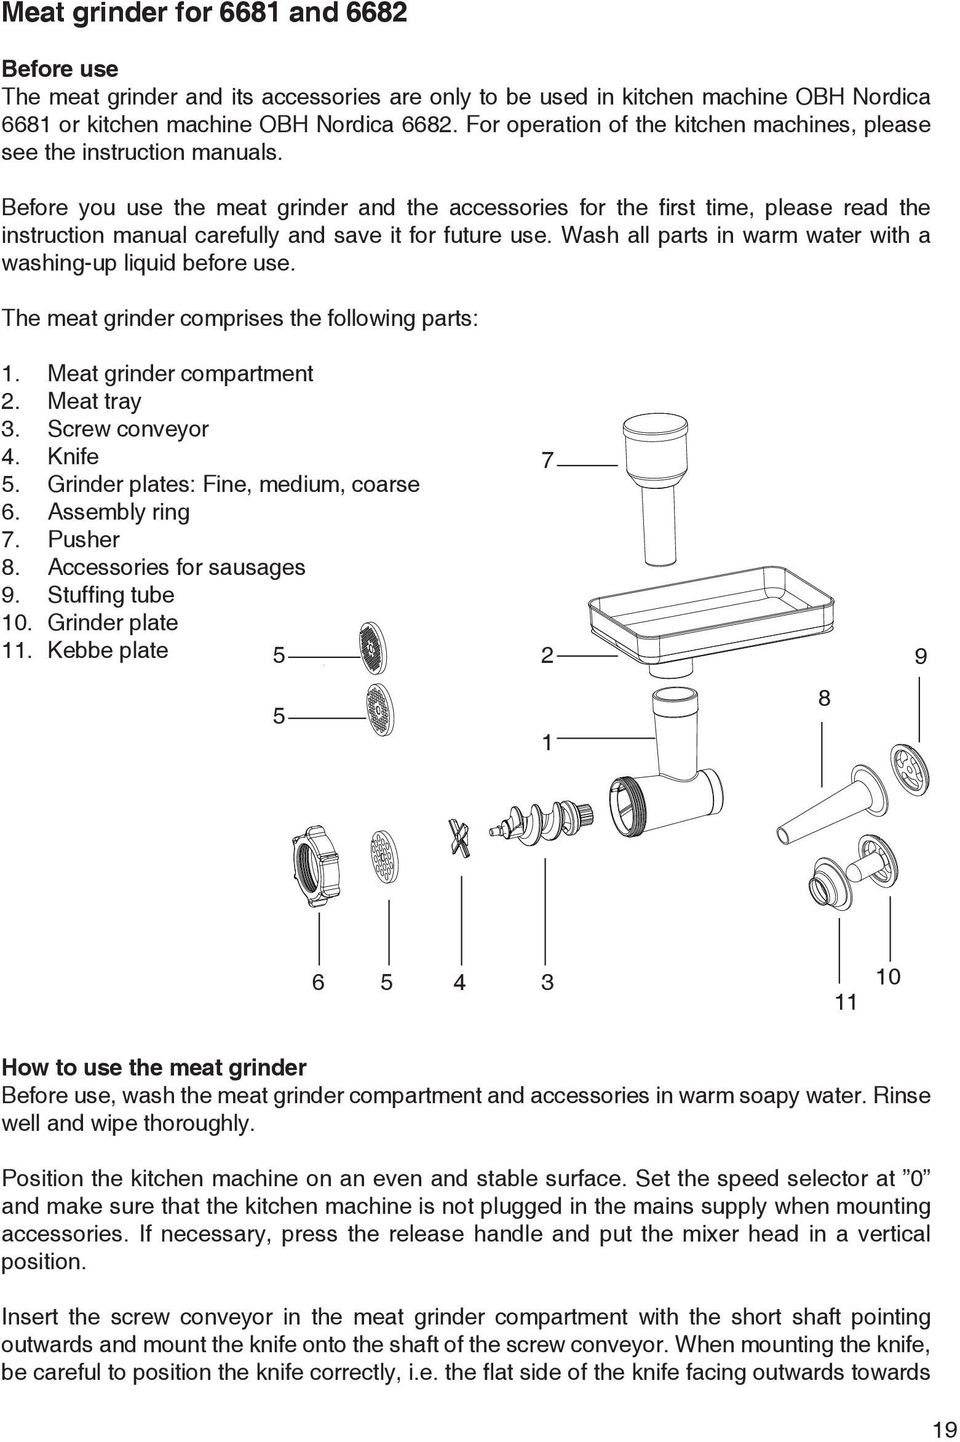 Before you use the meat grinder and the accessories for the first time, please read the instruction manual carefully and save it for future use.